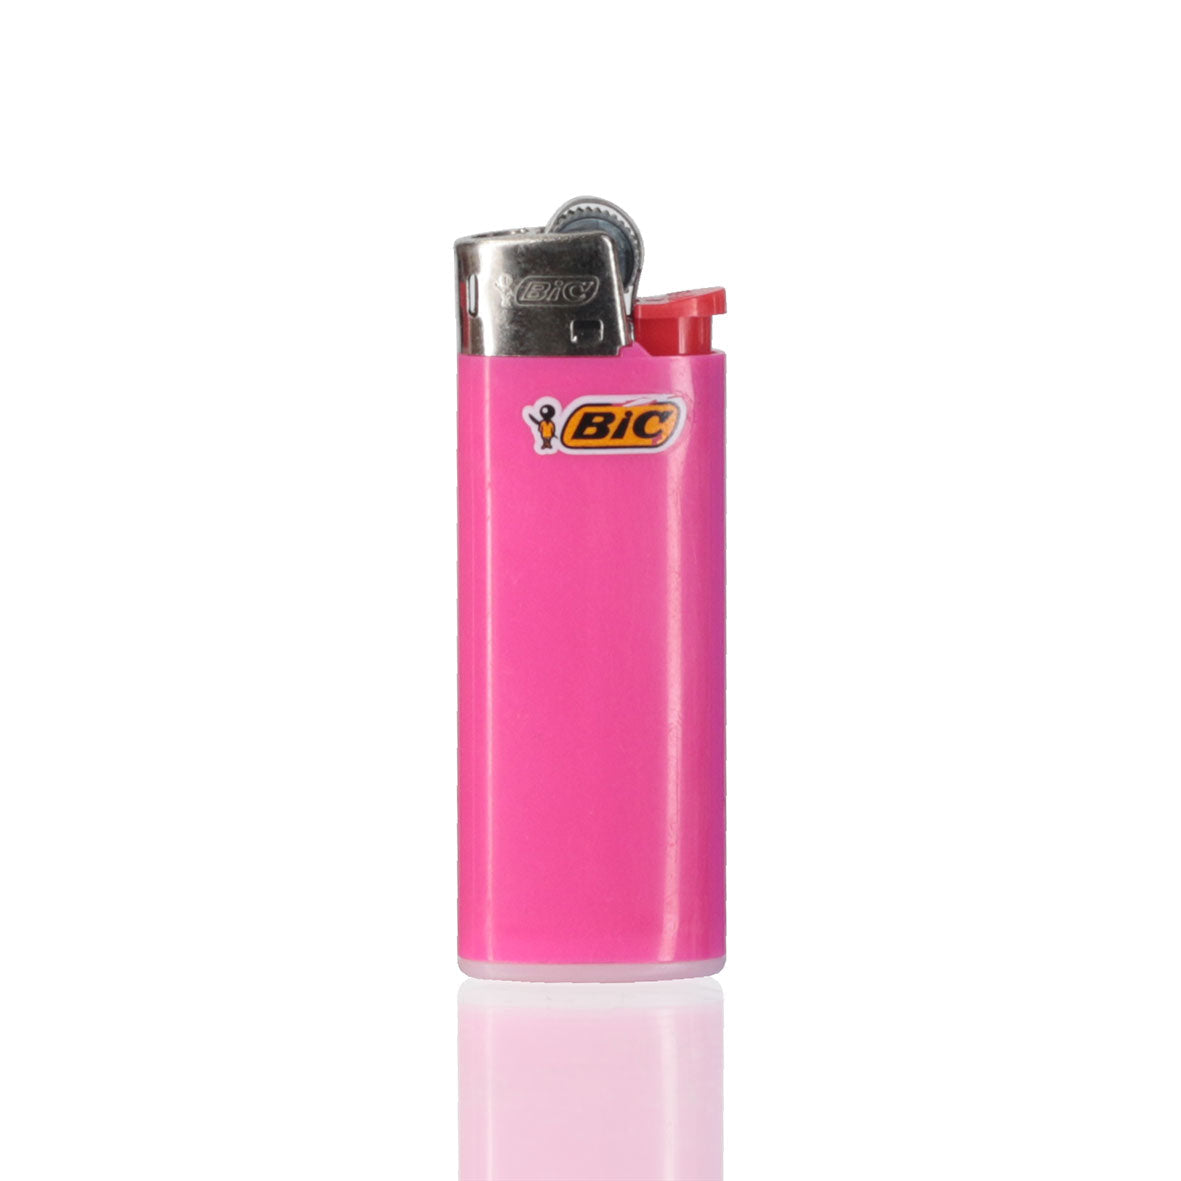 Bic Mini Lighter - Assorted Colours